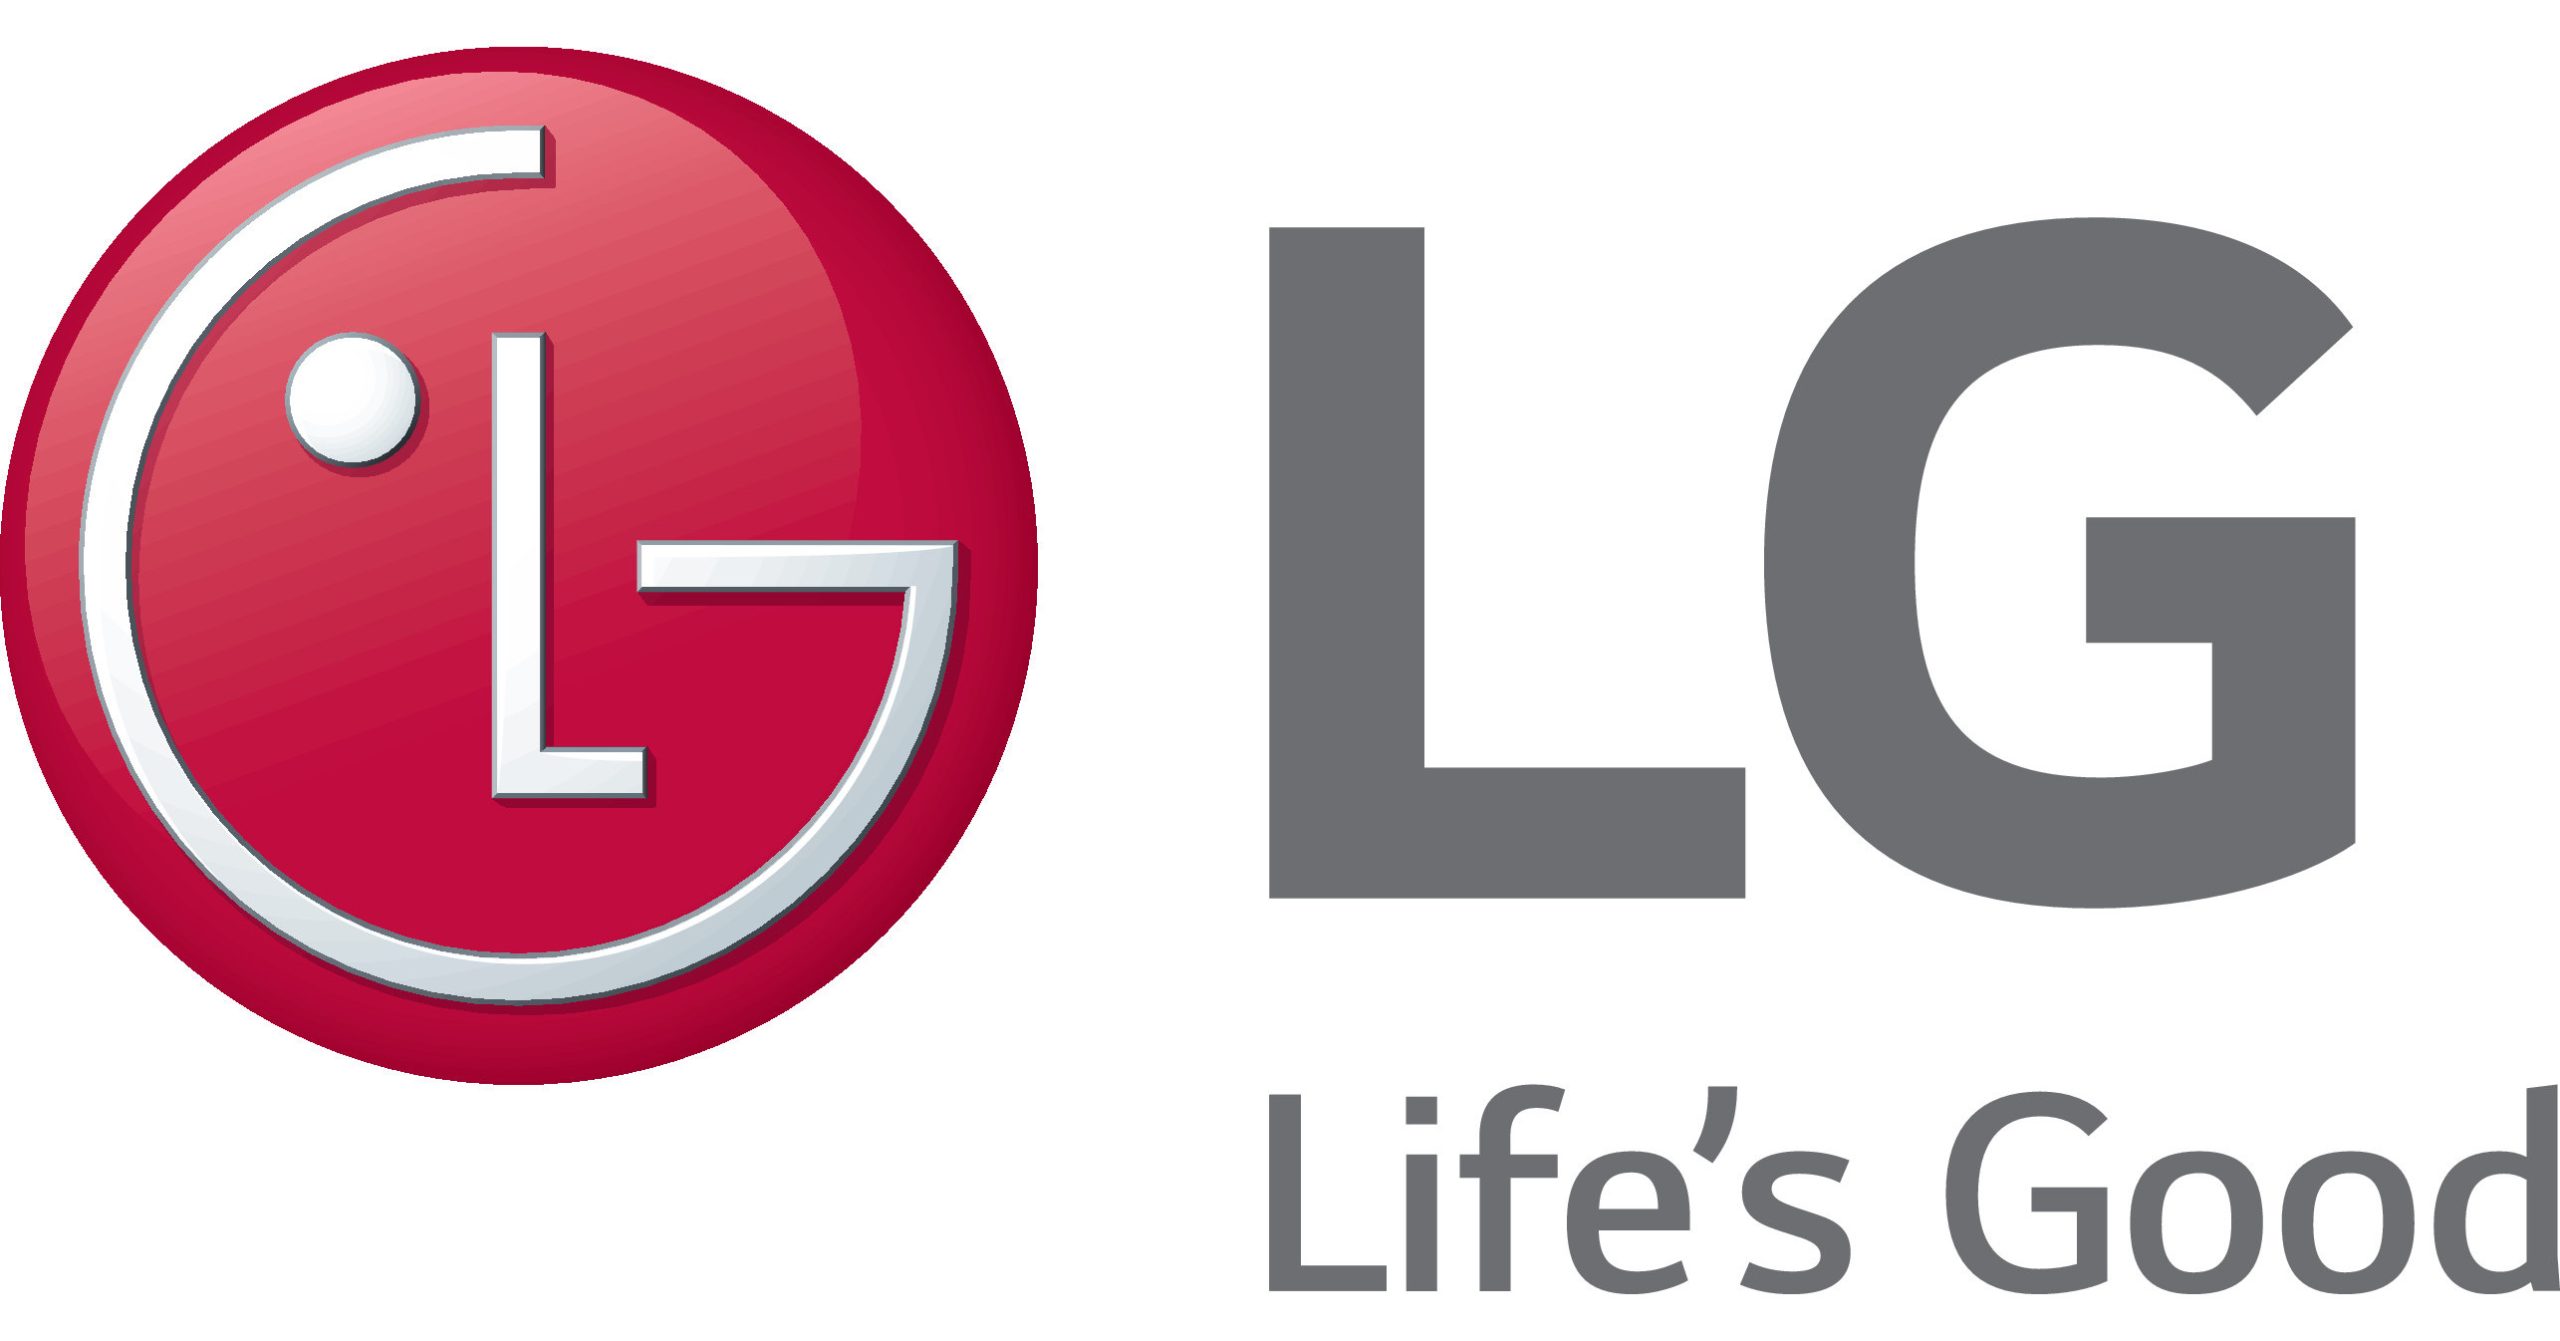 LG Electronics continues its commitment to start operating in a socially impactful and entrepreneurial community